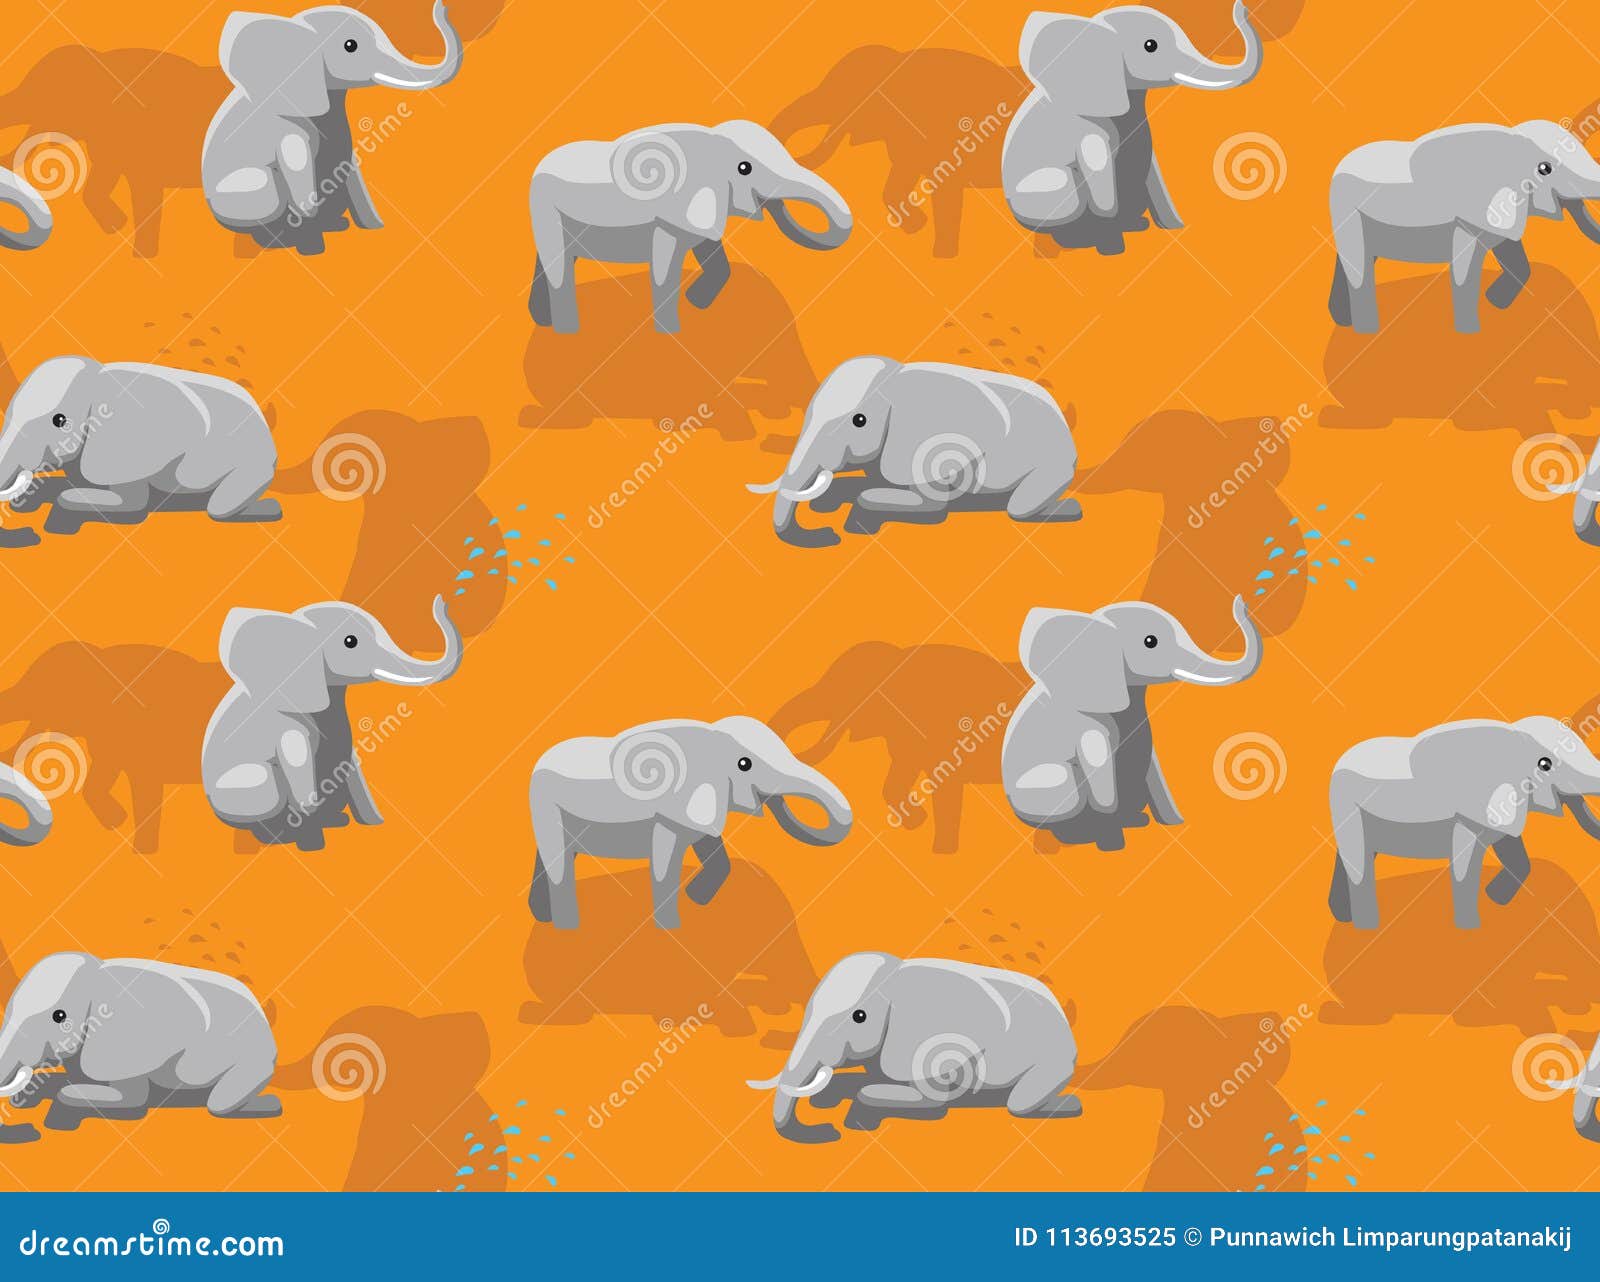 Change your phone wallpaper with these  I Love Elephants  Facebook